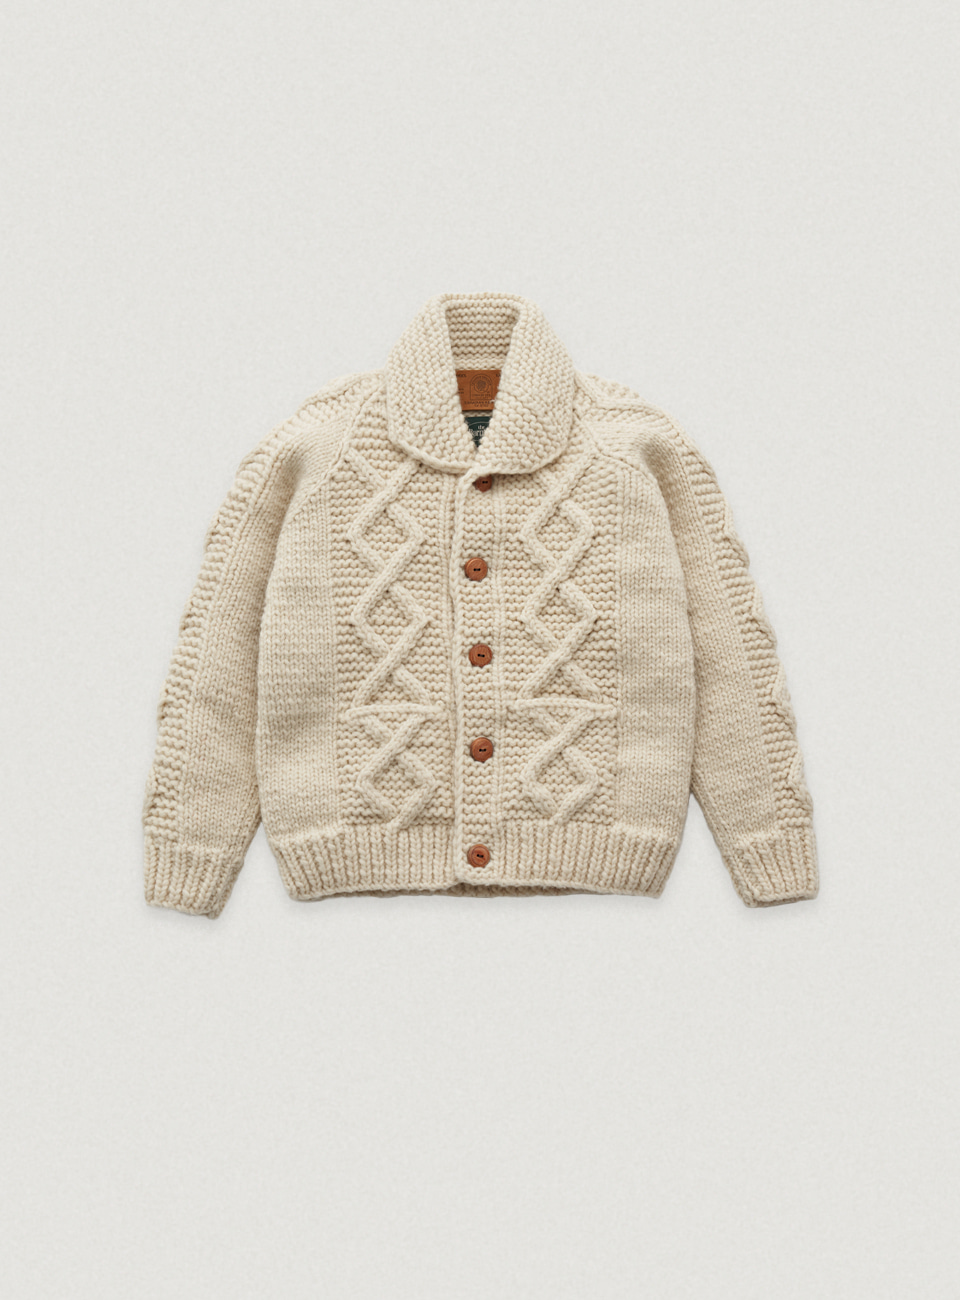 [Canadian Sweater Company x The Barnnet] Maple Hand Knit Cardigan